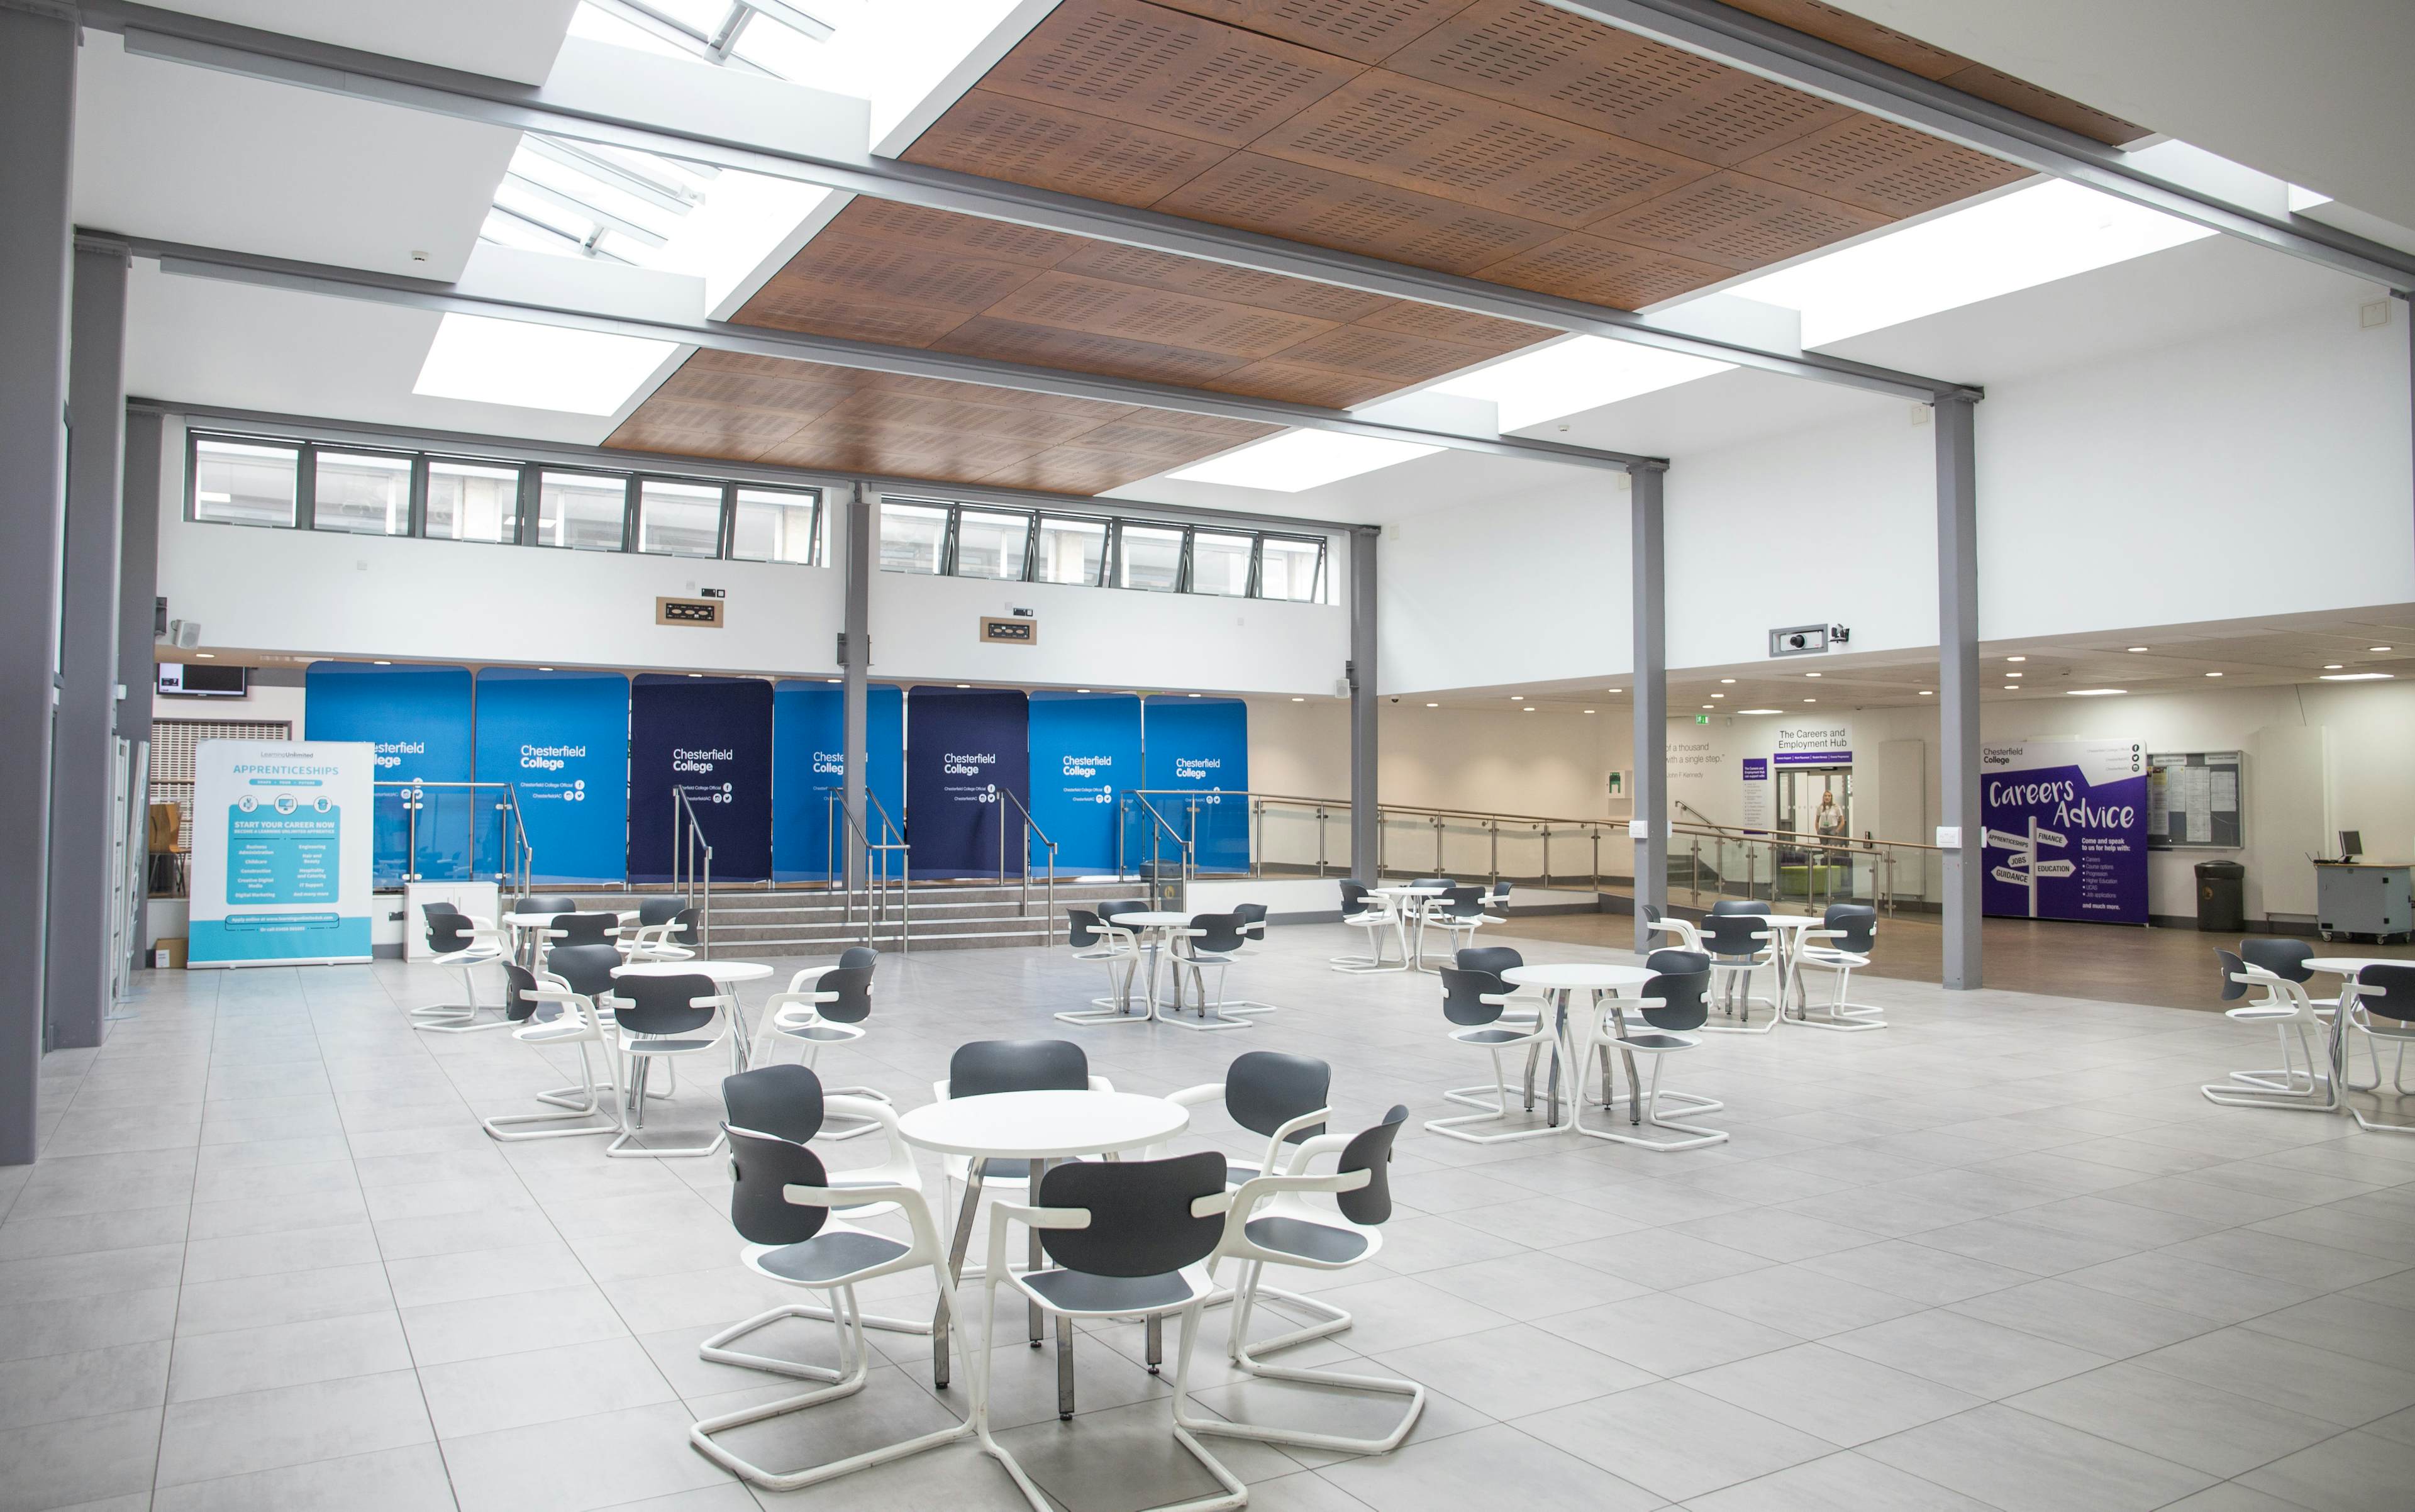 Chesterfield College - Heartspace image 1